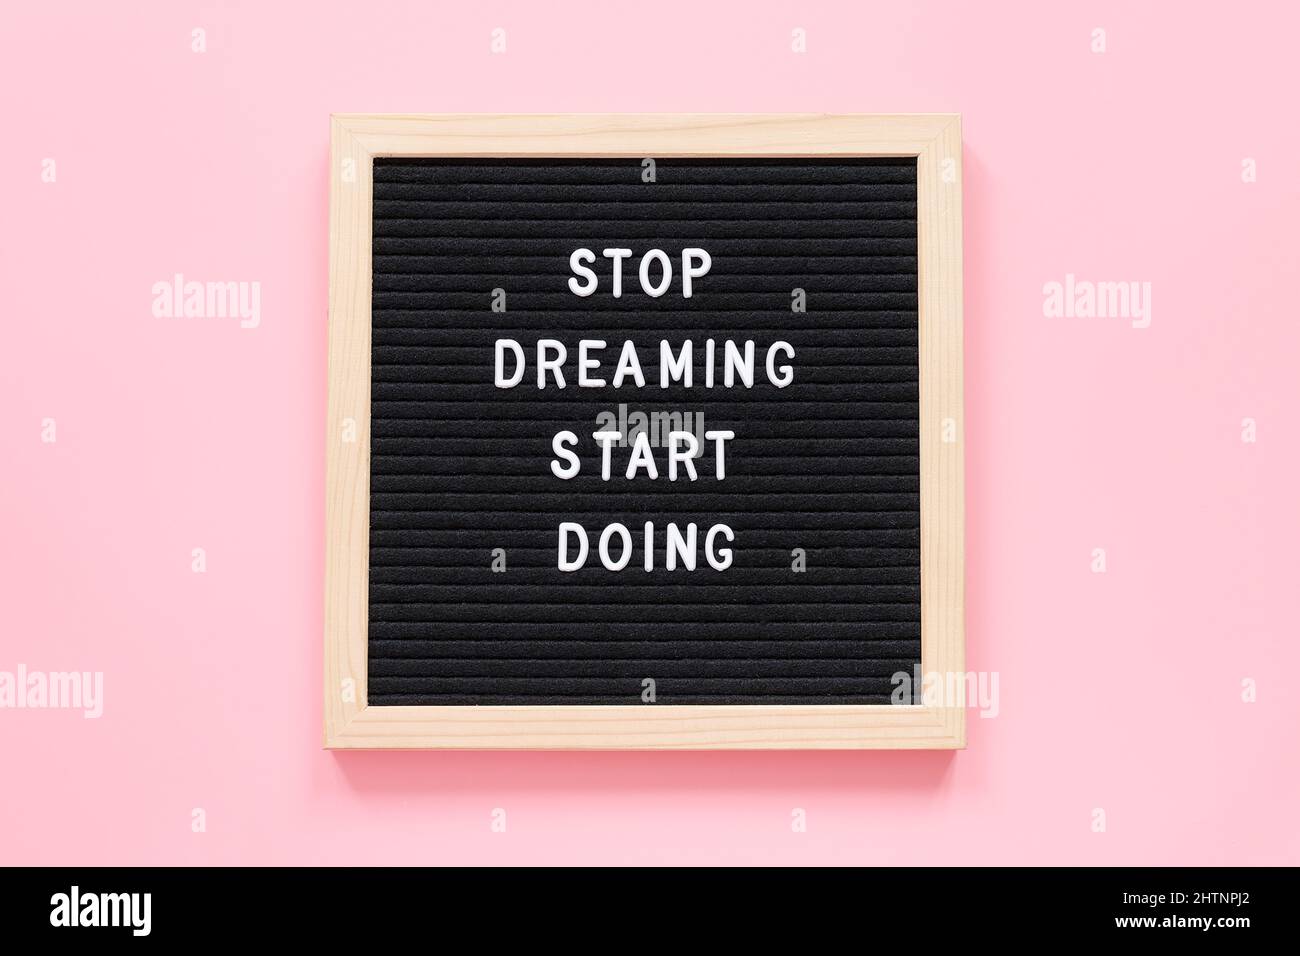 Stop Dreaming Start Doing. Motivational quote on letterboard on pink background. Top view Flat lay Concept inspirational quote of the day. Stock Photo